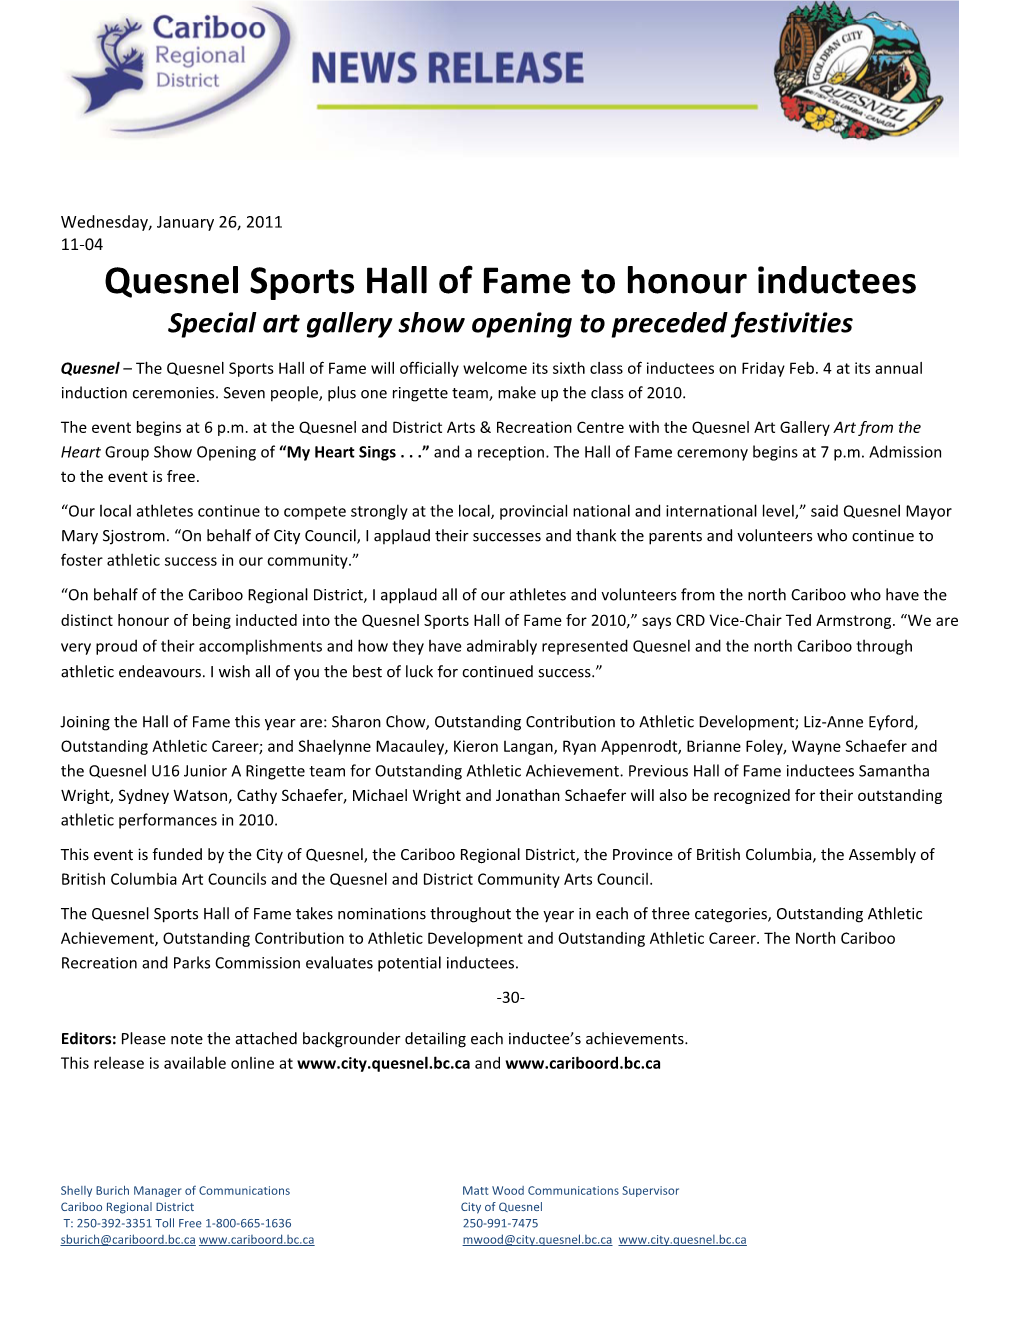 Quesnel Sports Hall of Fame to Honour Inductees Special Art Gallery Show Opening to Preceded Festivities